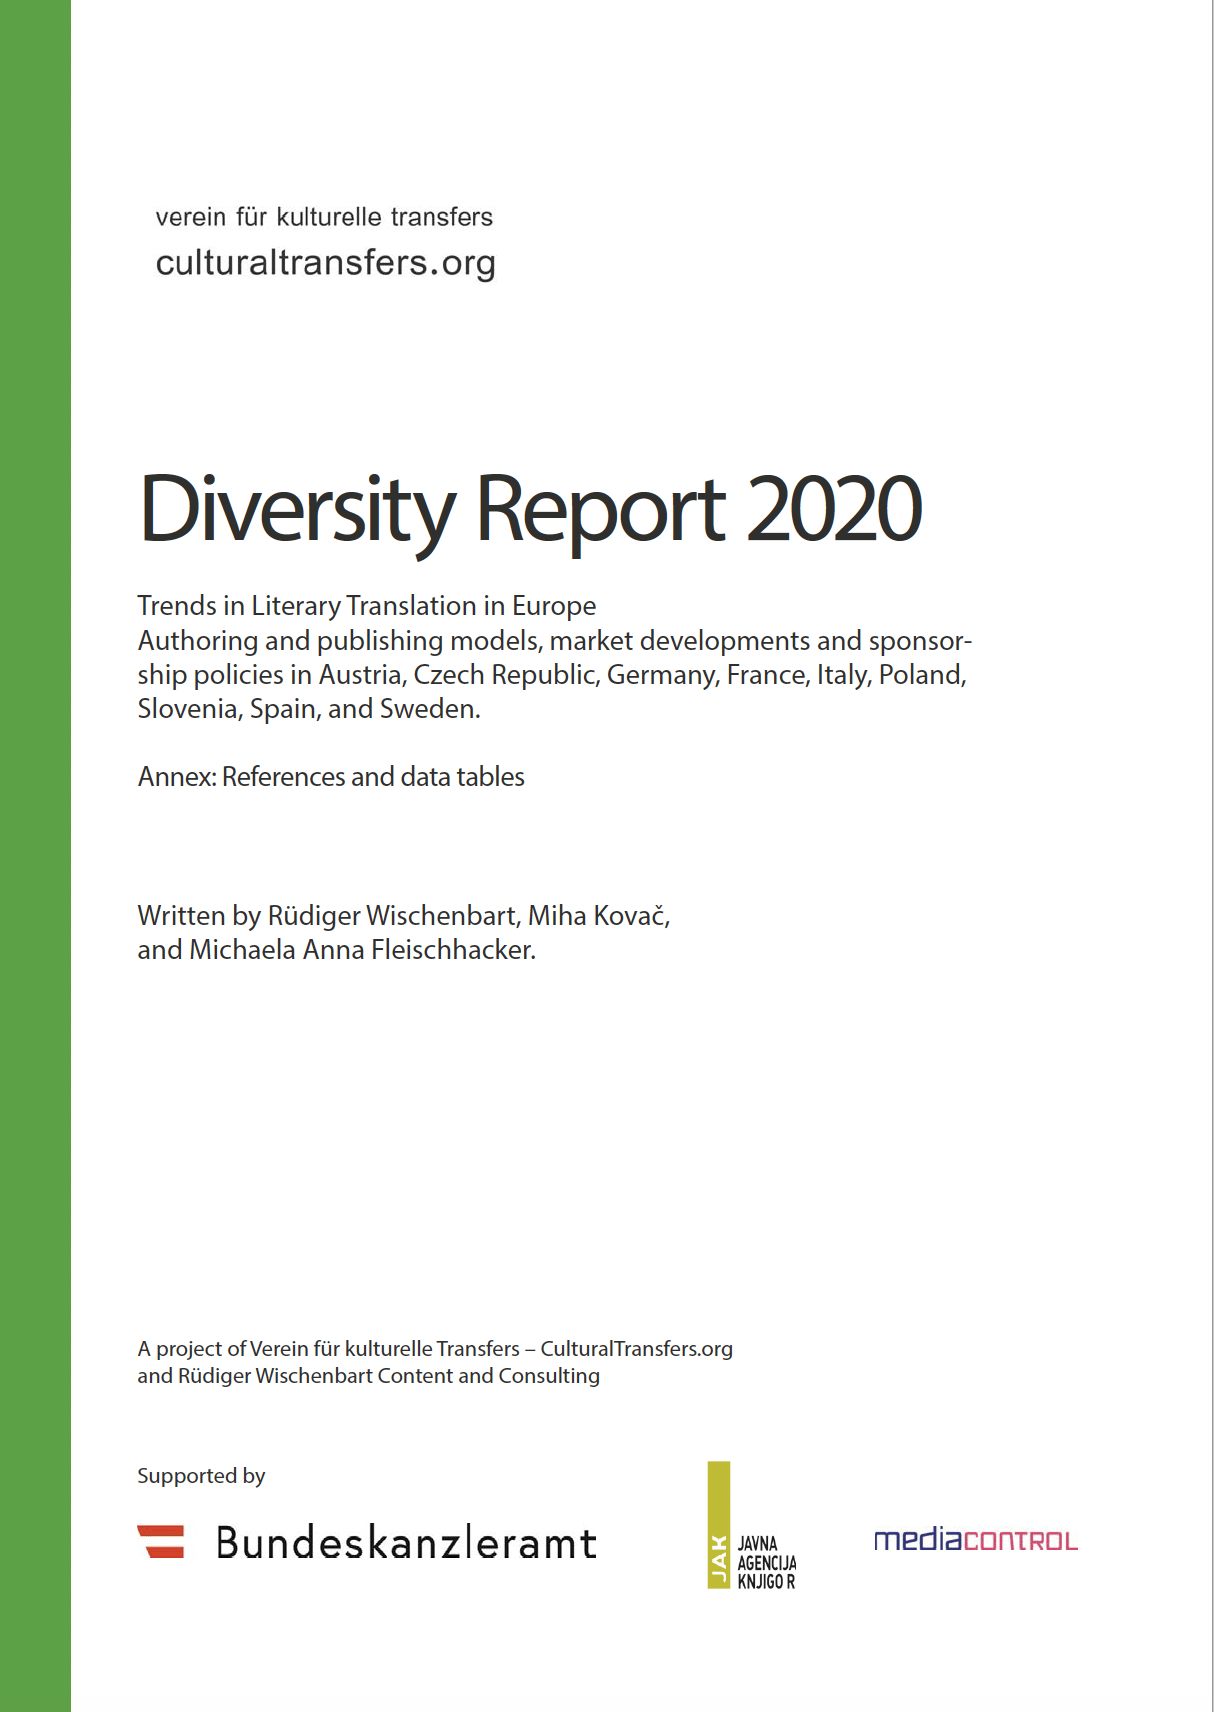 Diversity Report 2020 on Literary Translations in Europe